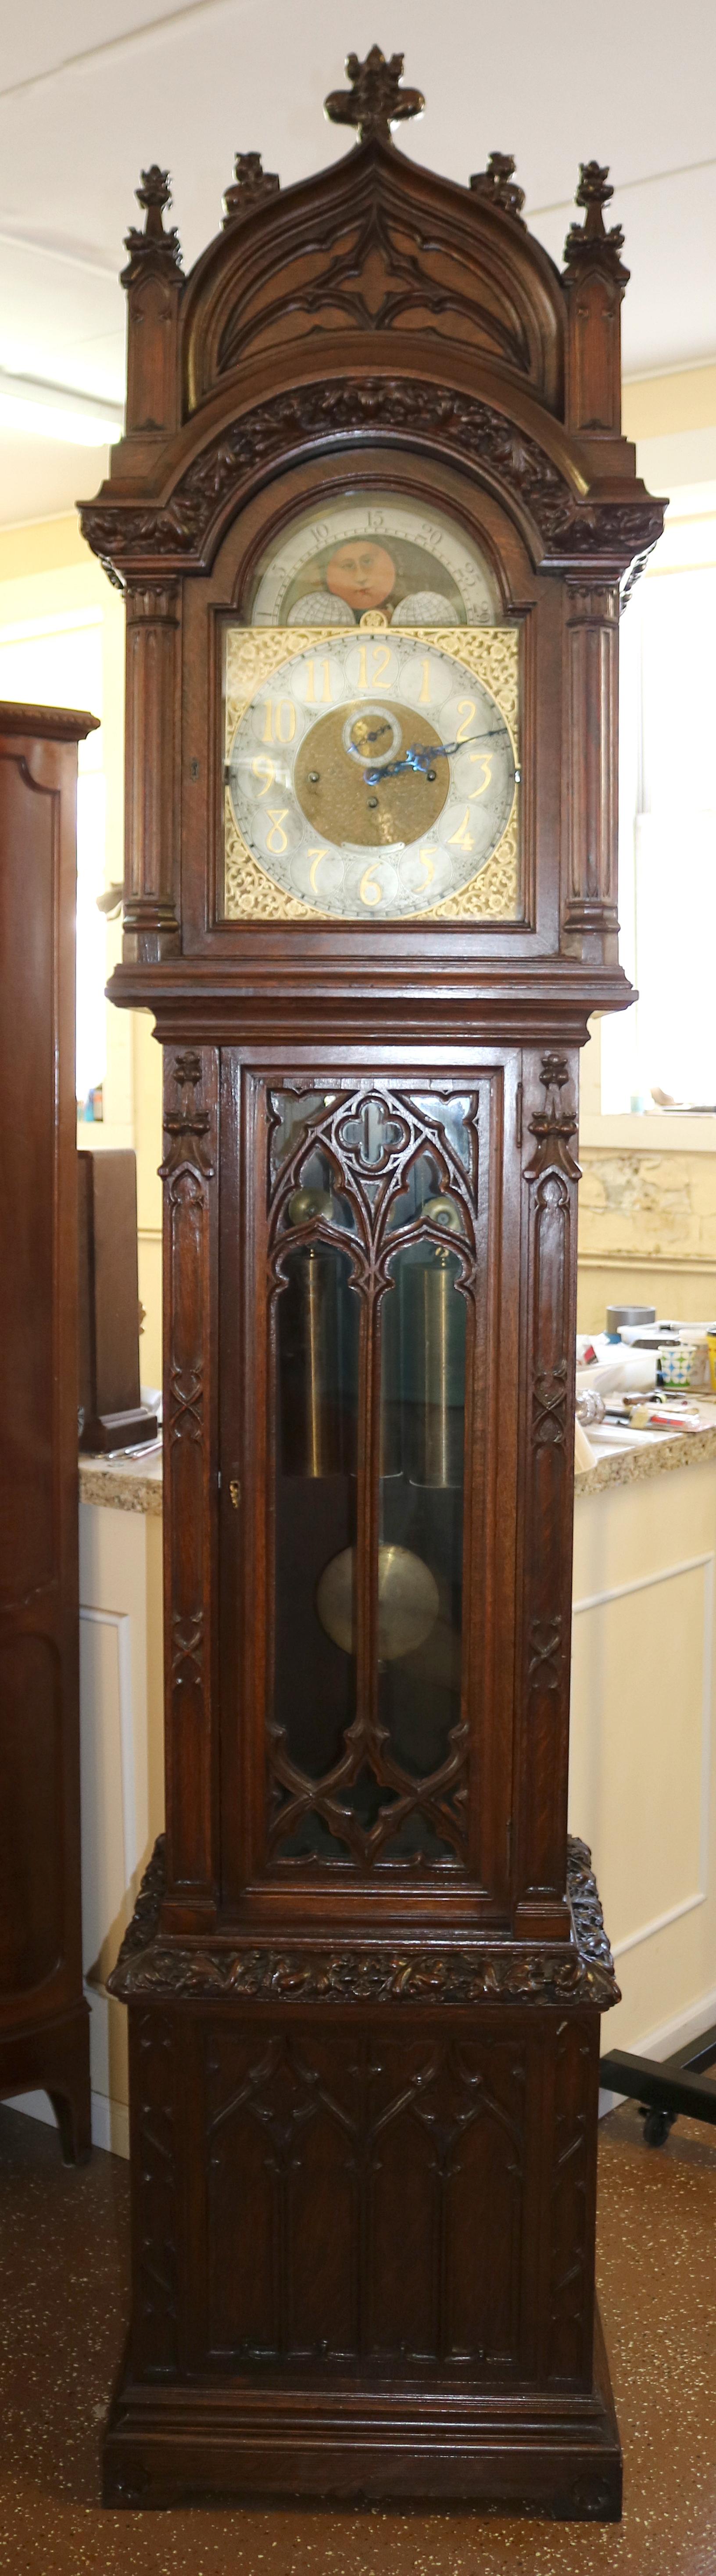 American Early 20th Century Carved Oak Gothic 5 Gong Tall Case Grandfather Clock